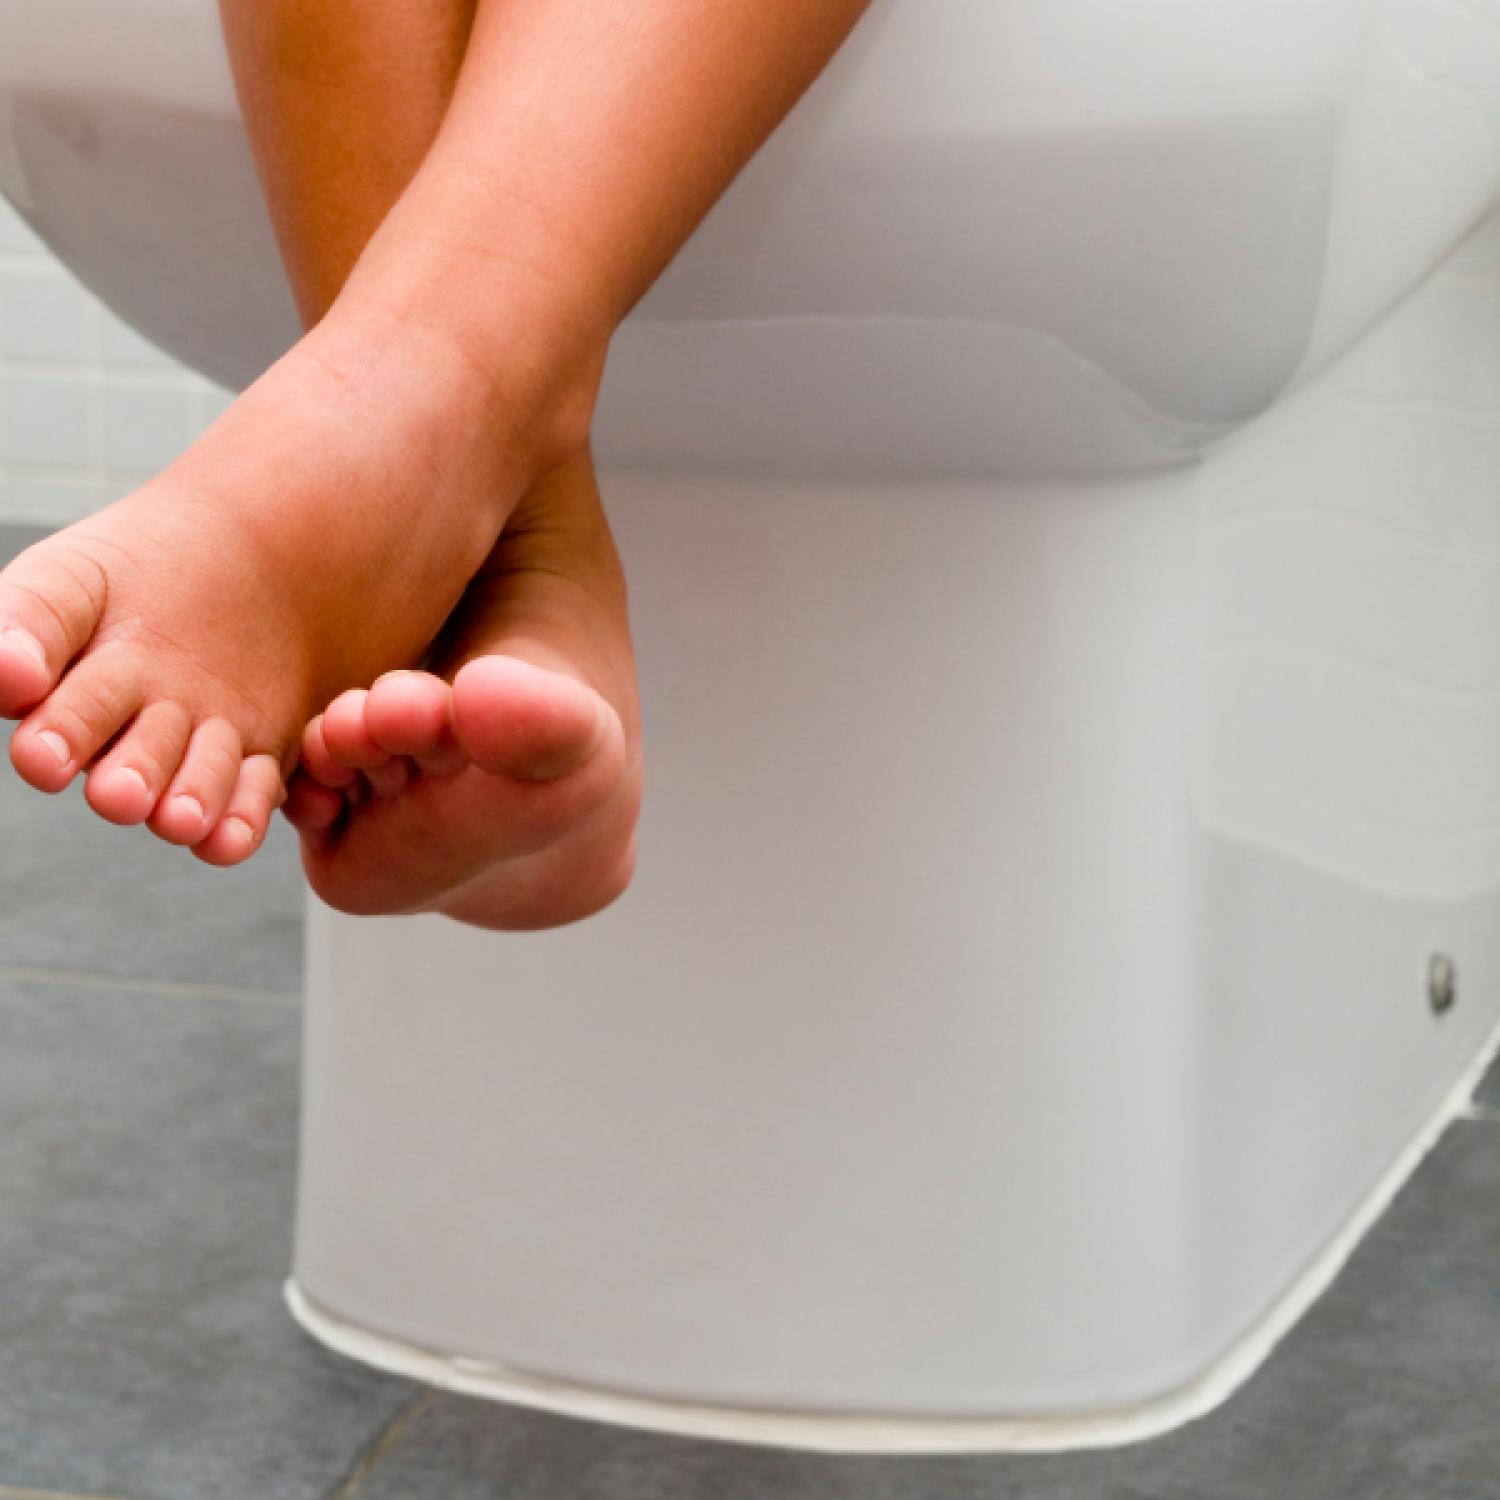 There’s More to Potty Training Than You Think